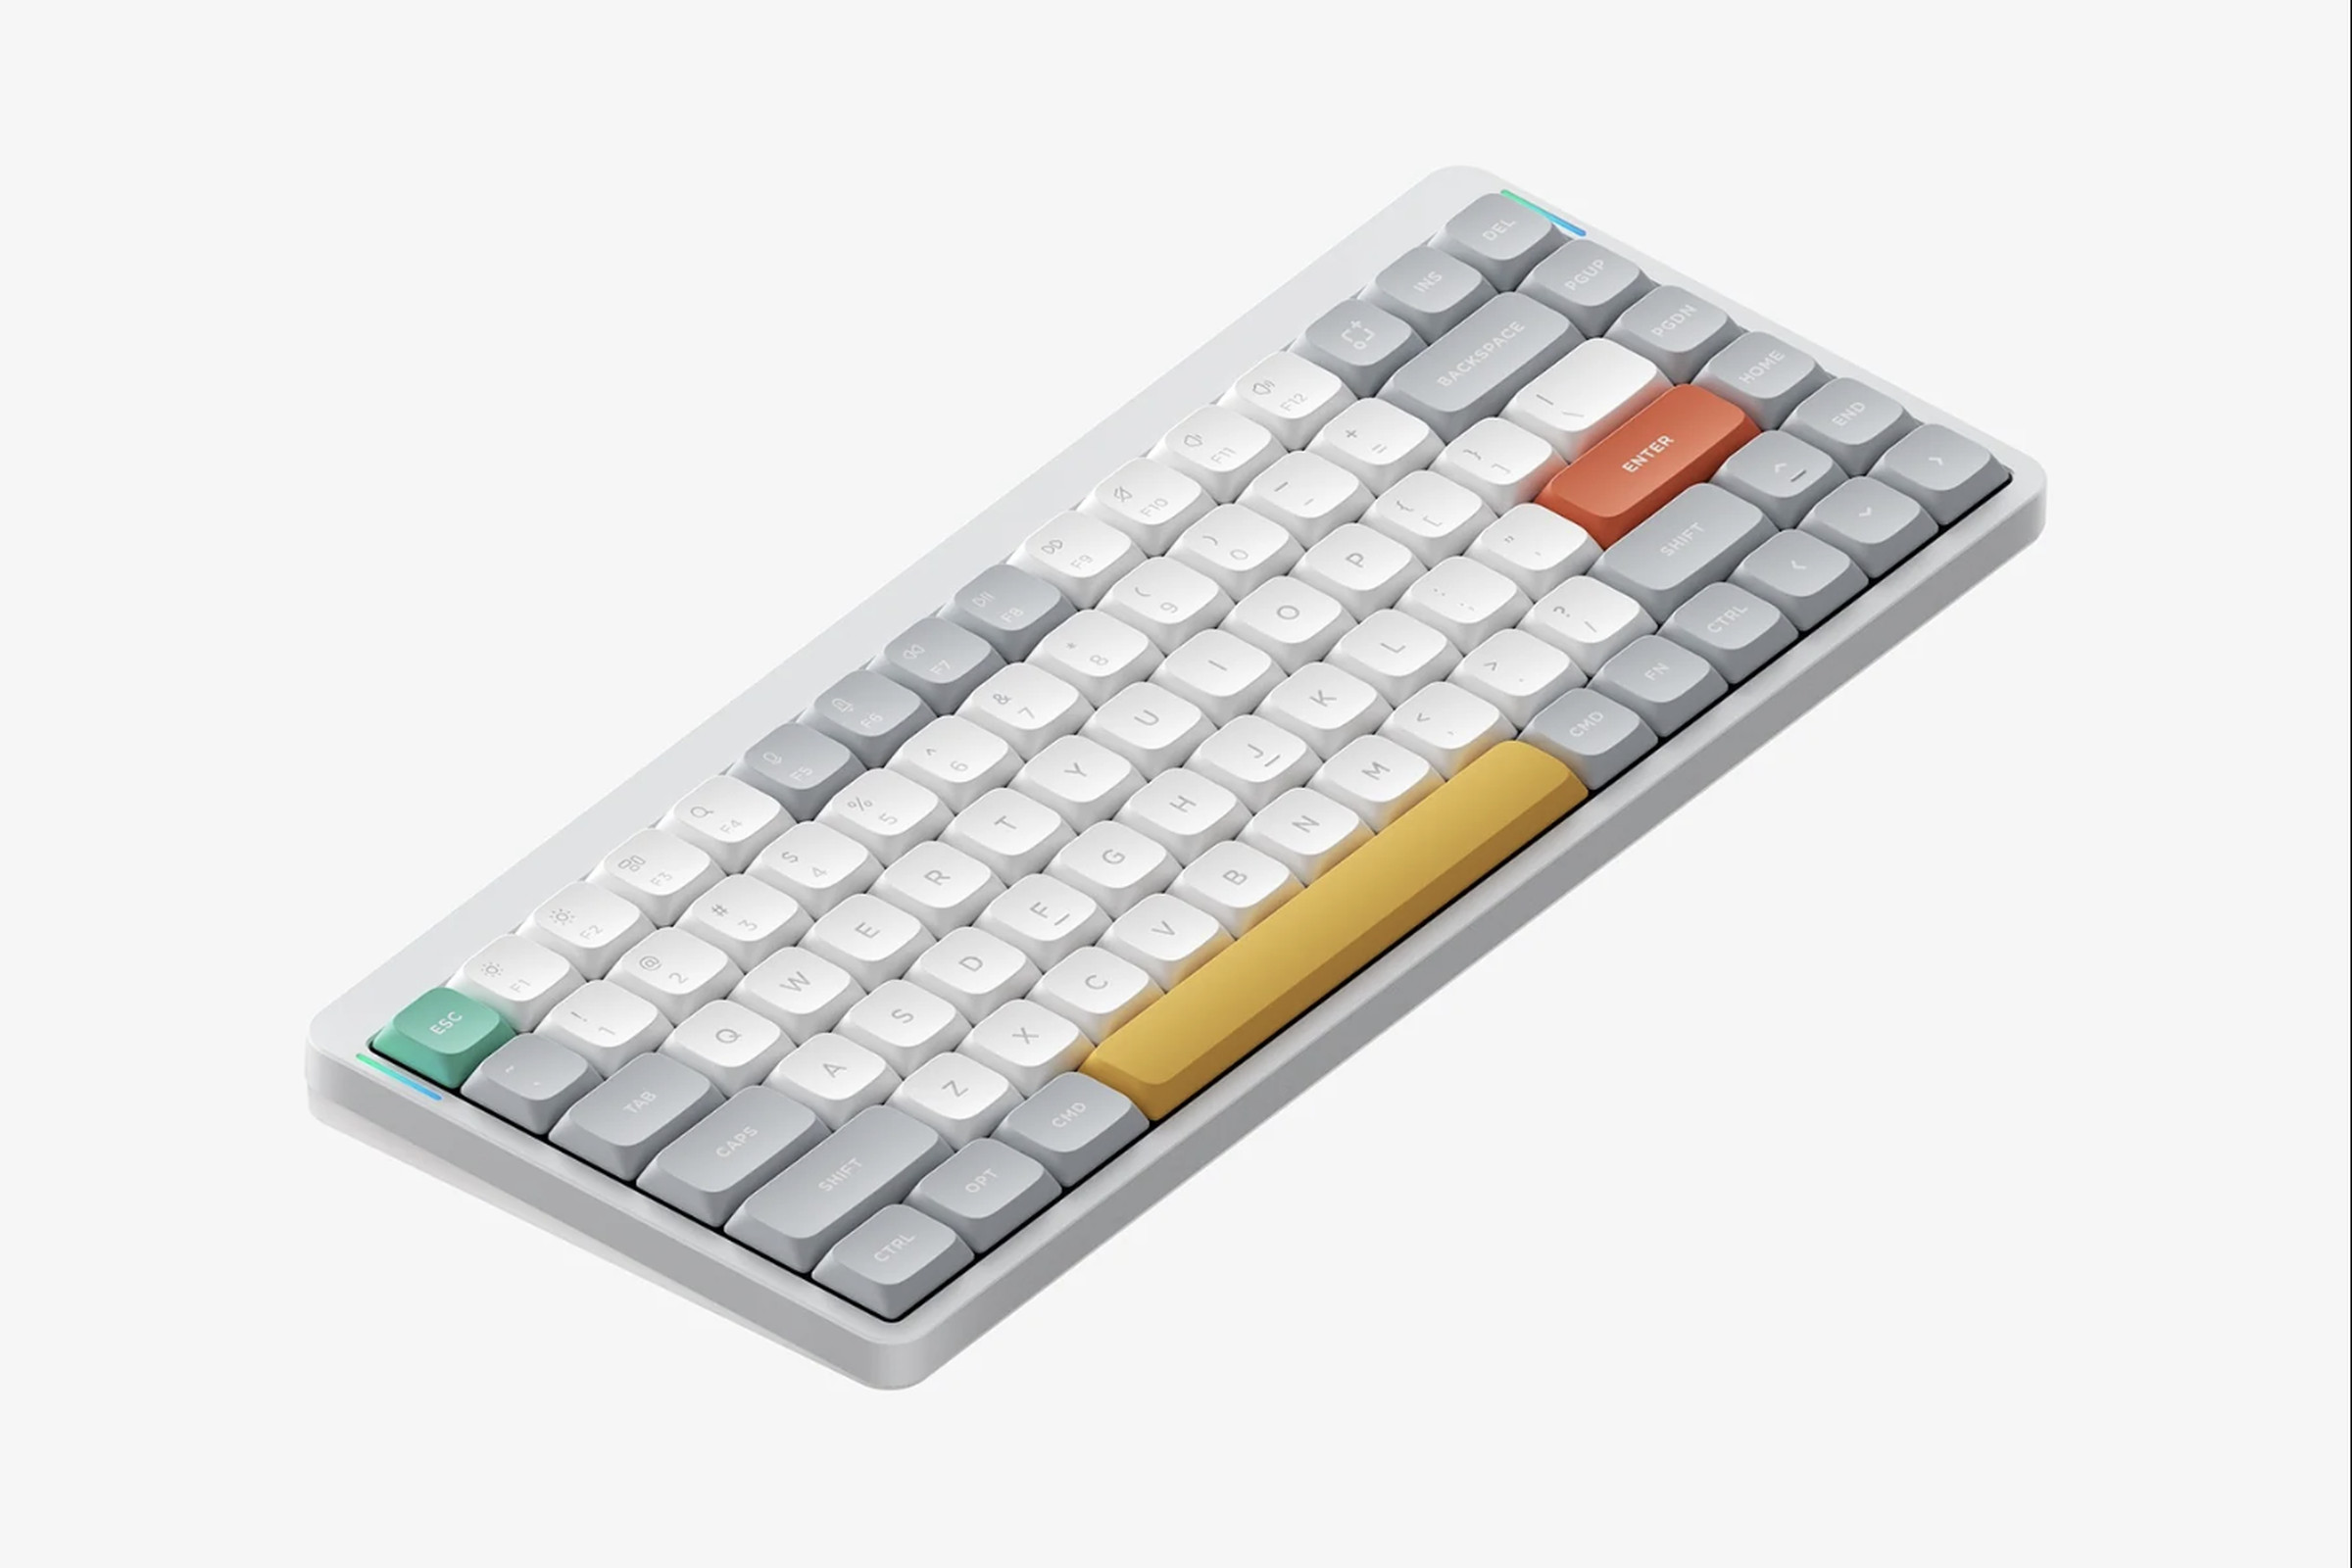 Keyboard with white, gray, red, and yellow keys.